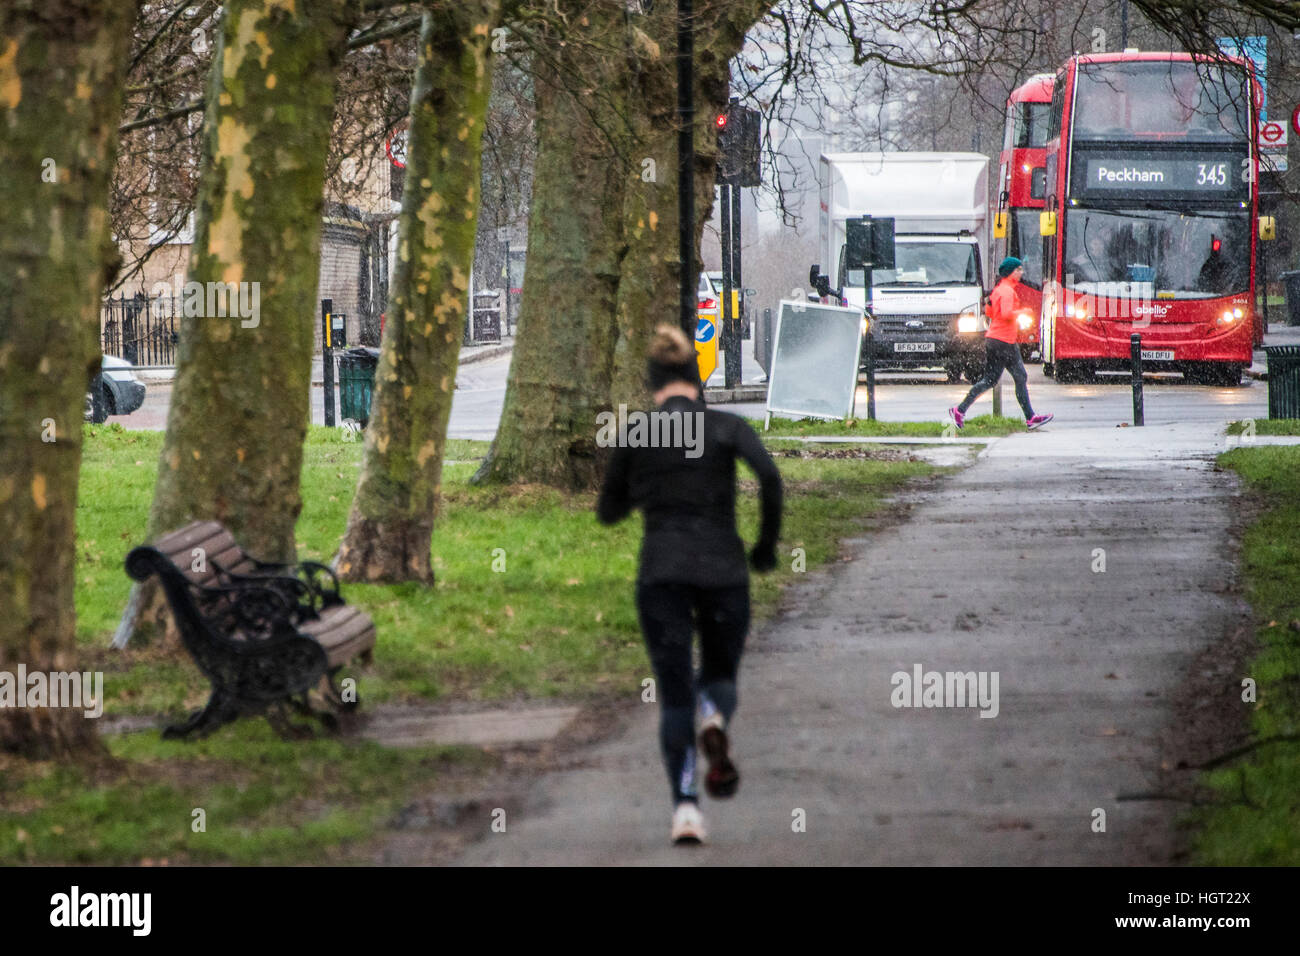 London, UK. 13th Jan, 2017.   Vehicle lights are onin the gloom approaching the Northside - A blizzard of snow sweeps across Clapham Common with an icy Northerly wind. Even so it does not deter dog walkers, joggers and cyclists. © Guy Bell/Alamy Live News  Stock Photo